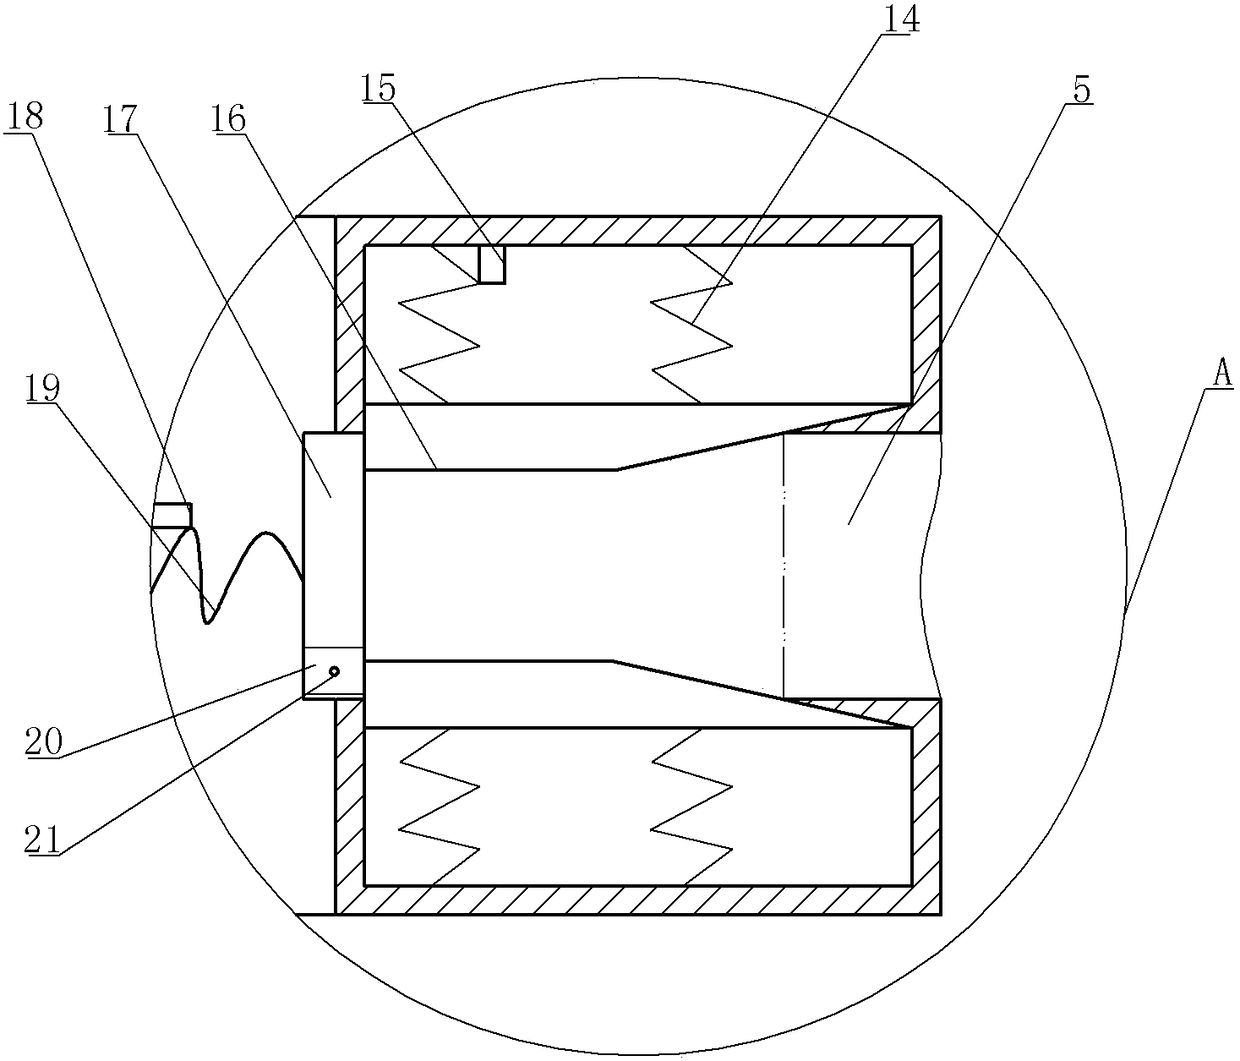 Flip-side structure for production of door panels